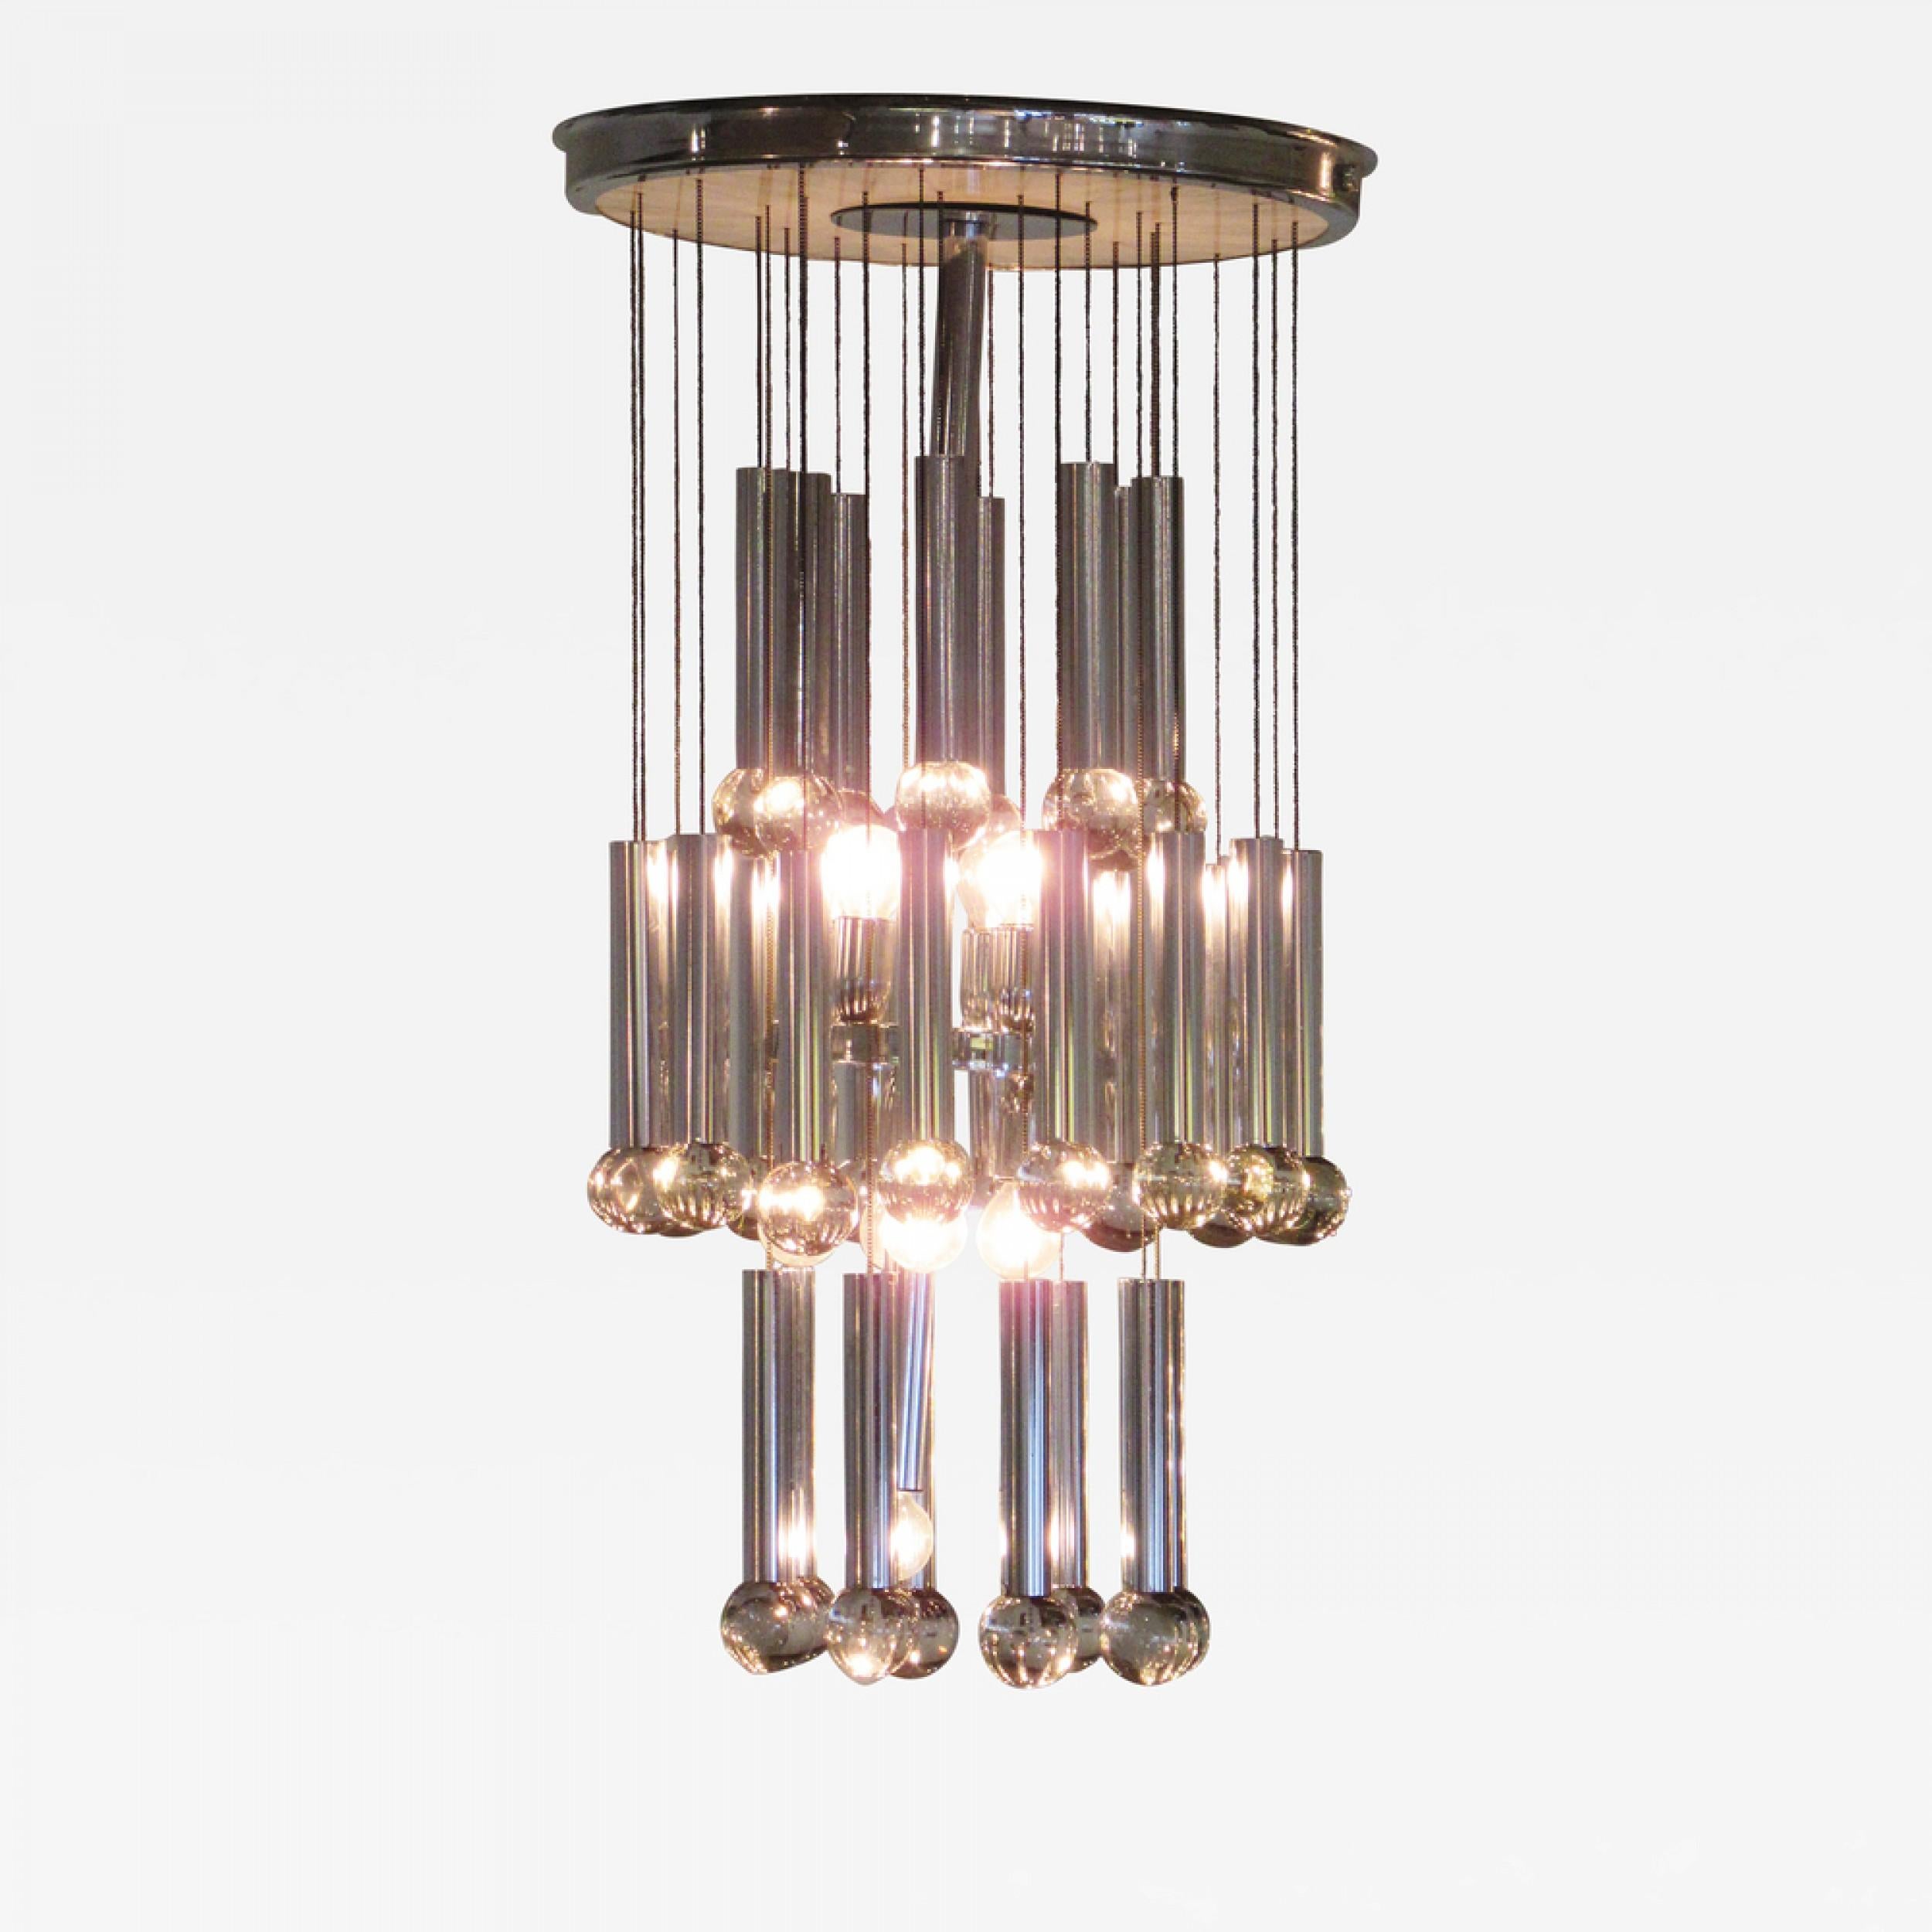 Italian Midcentury (1960s) chandelier comprised of three tiers of hanging polished chrome cylindrical lights. (GAETANO SCIOLARI).